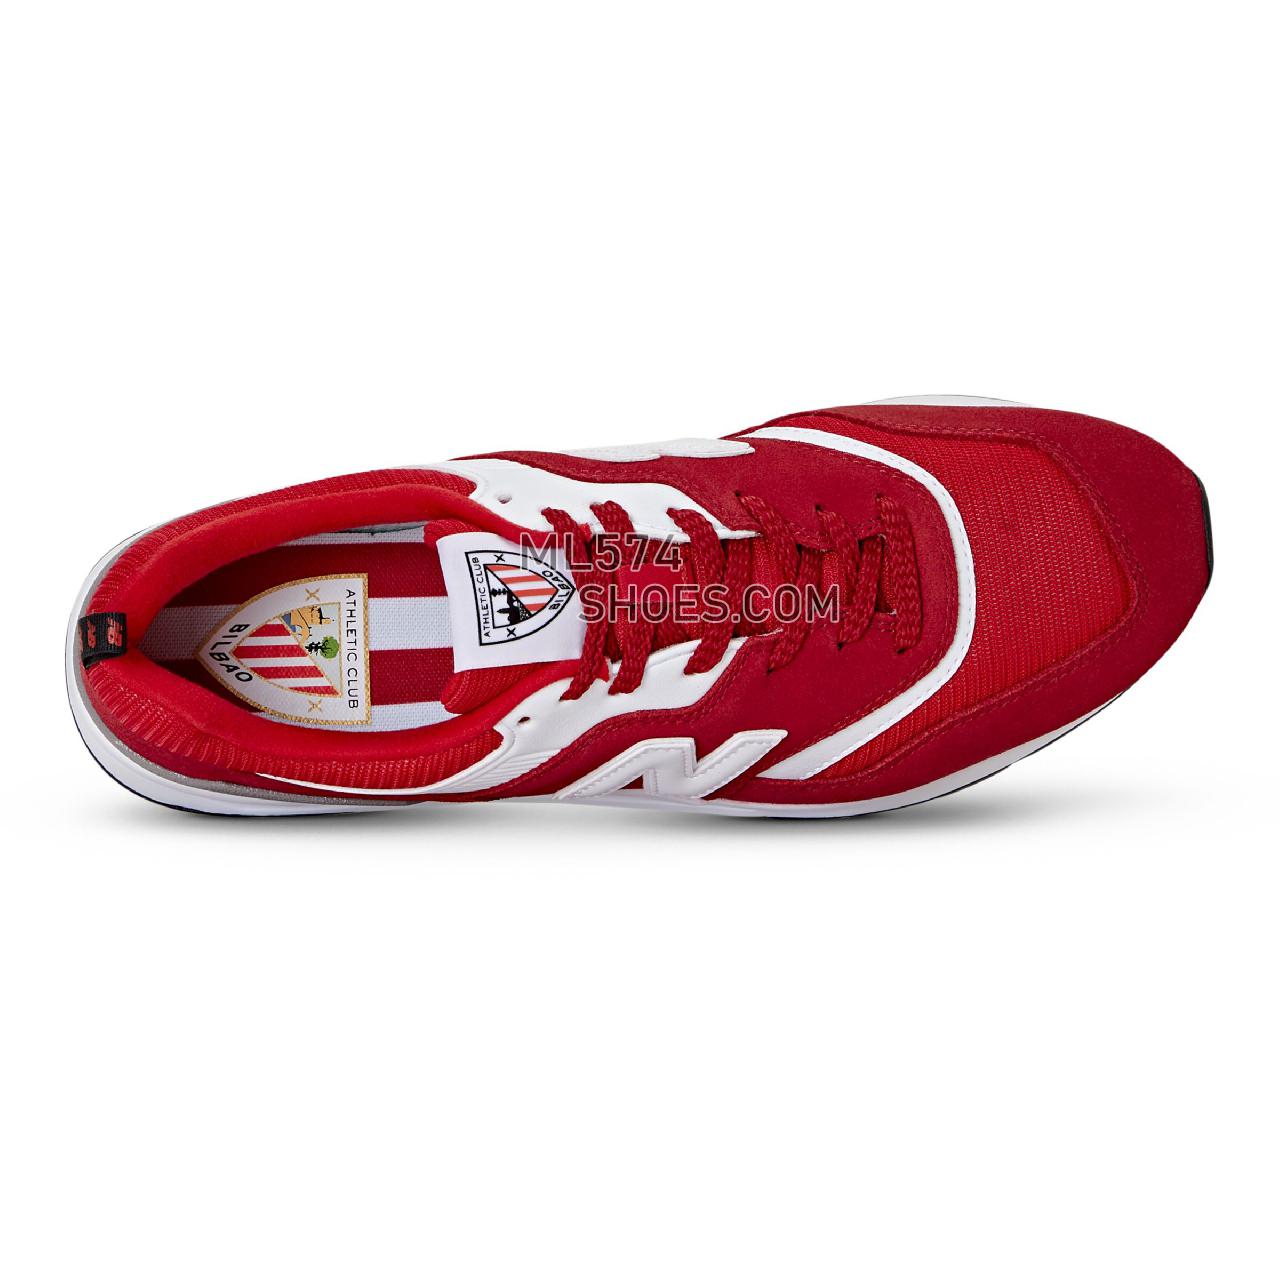 New Balance Athletic Club 997H - Men's Sport Style Sneakers - Chilli Pepper with Racing Red - CM997HB1